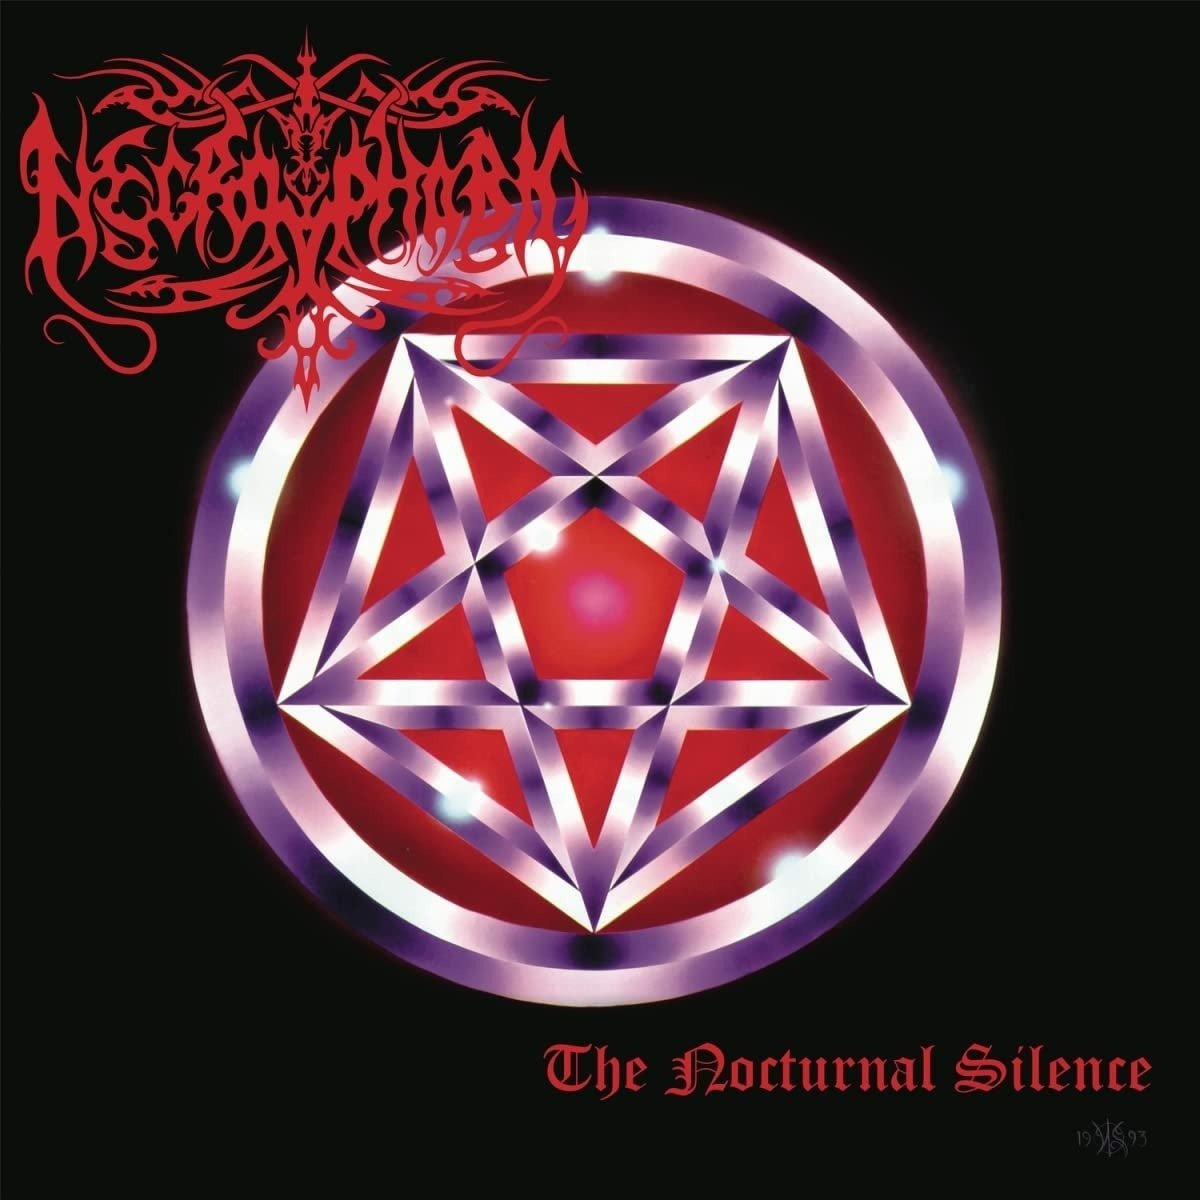 Necrophobic - The Nocturnal Silence (Re-Issue 2022), Vinyl